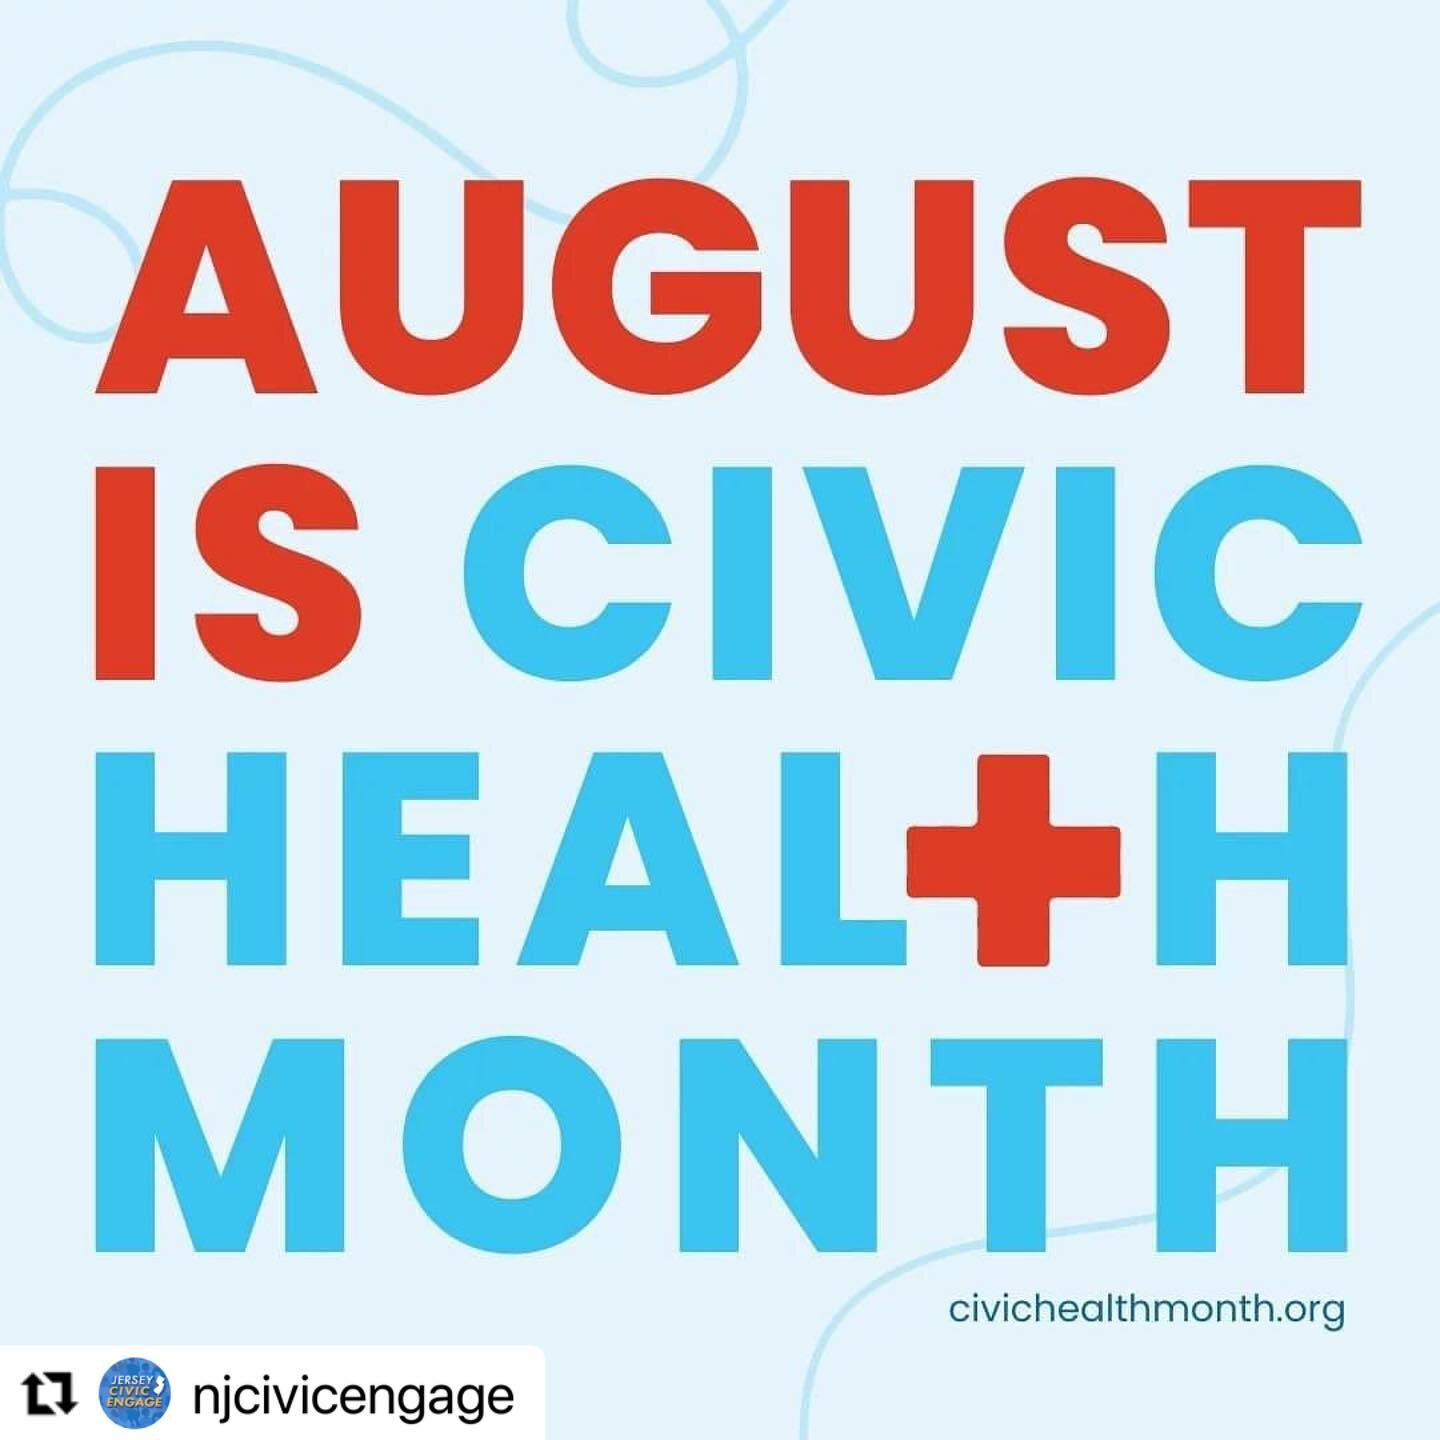 #Repost @njcivicengage with @use.repost
・・・
Civic Health Month, proclaimed by @govmurphy, recognizes the important work of health care providers and advocacy organizations to improve the civic health of New Jersey communities, and reminds us that civ